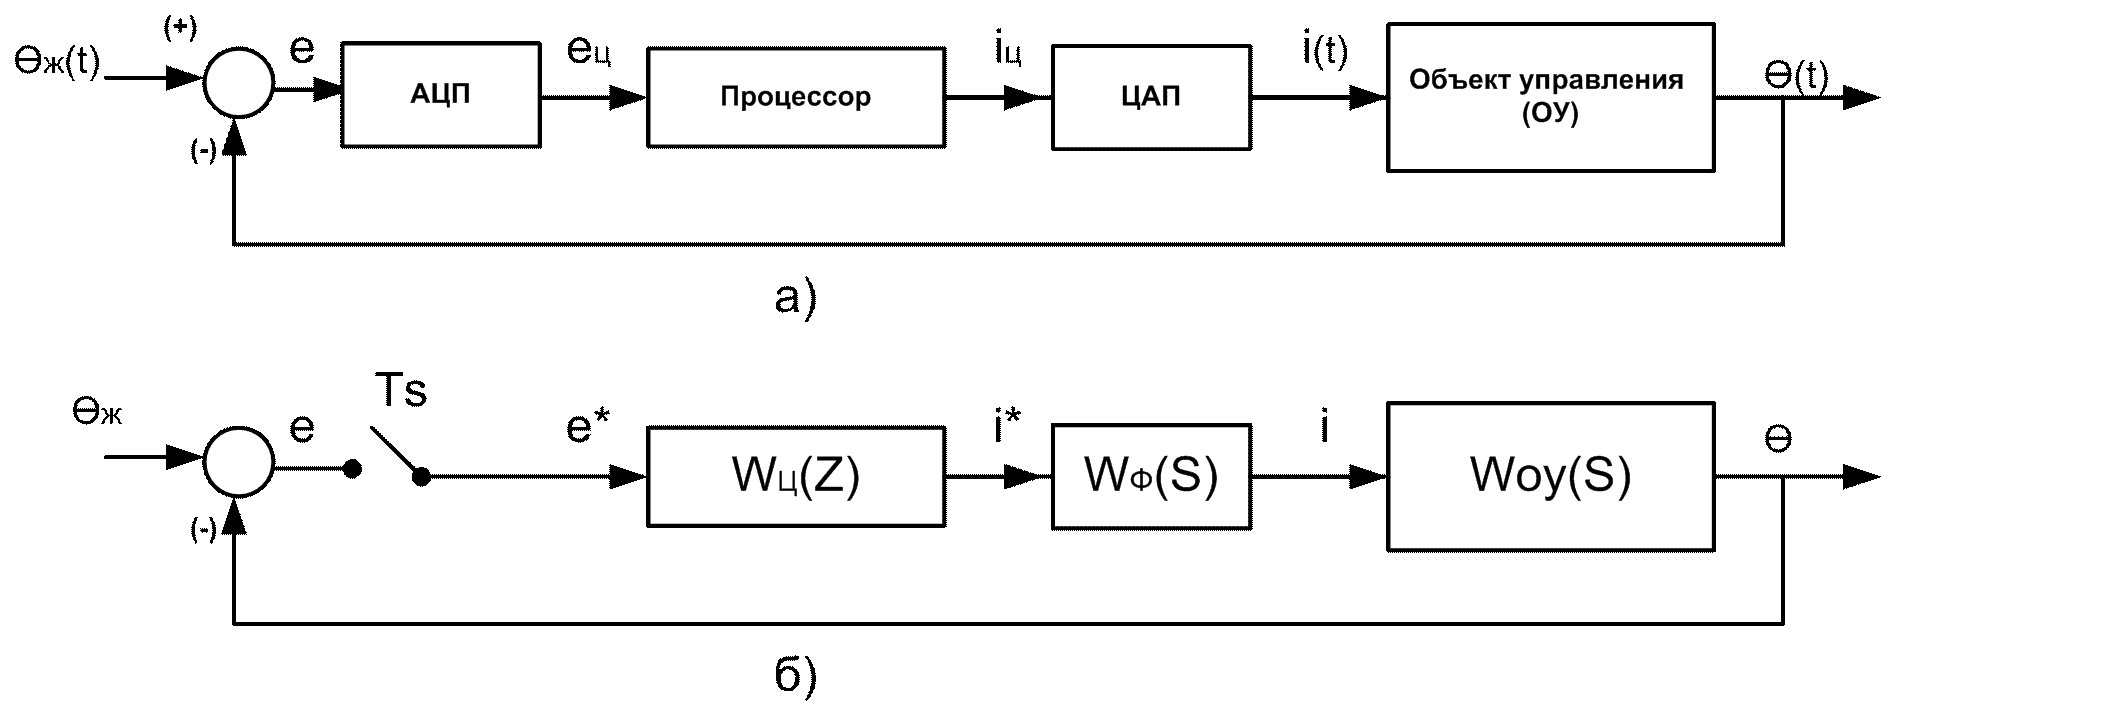 Functional (a) and block diagram of a digital control system